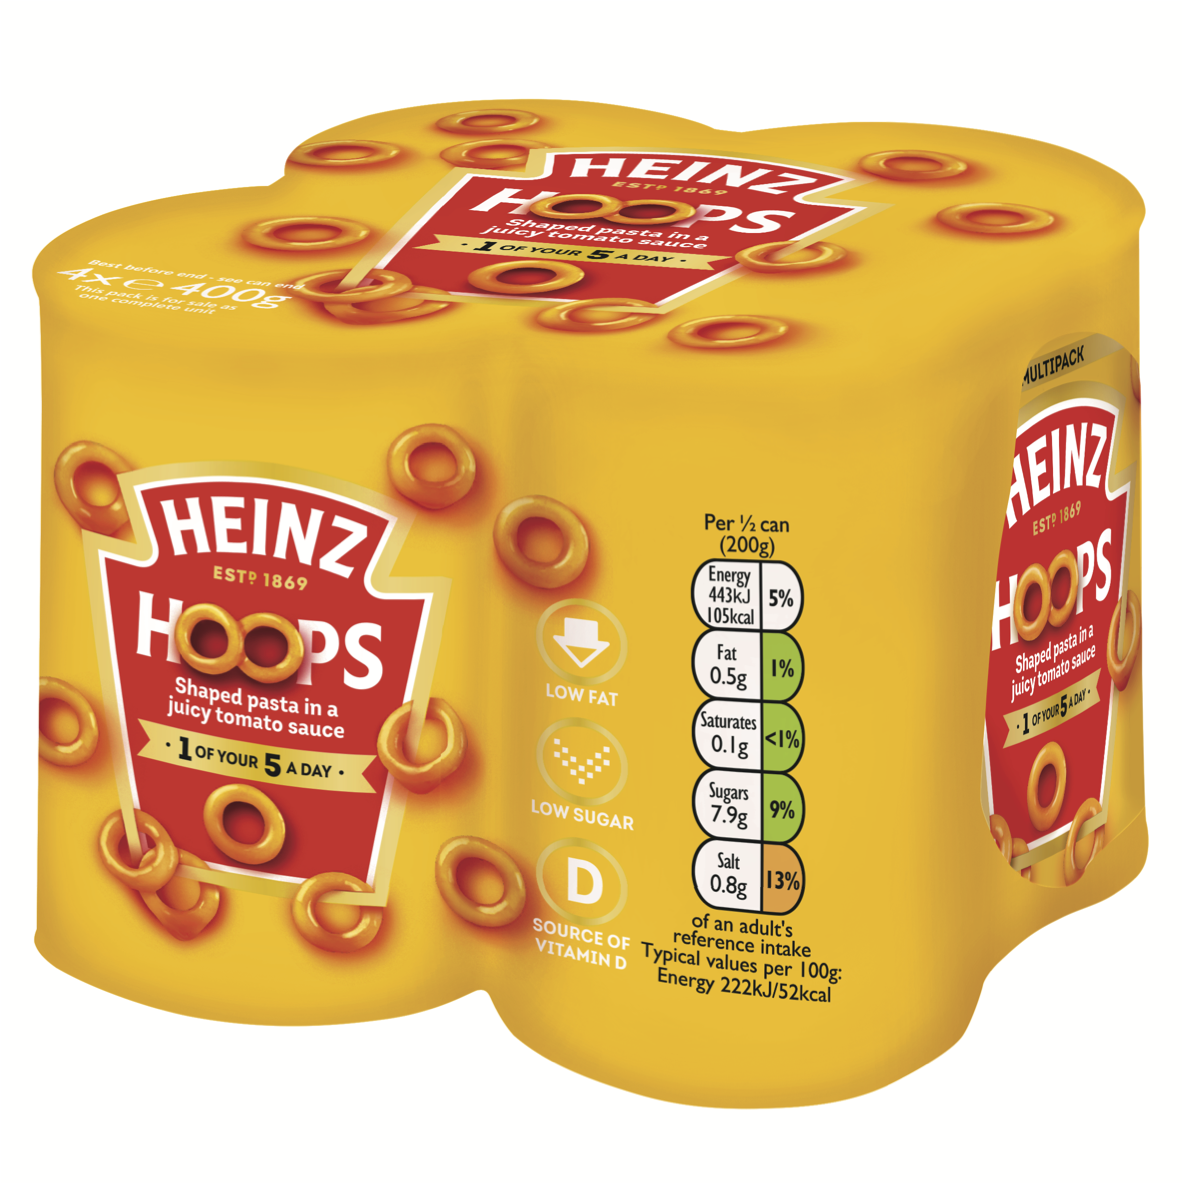 Photograph of 1 x 4 pack of 400g Heinz Hoops product